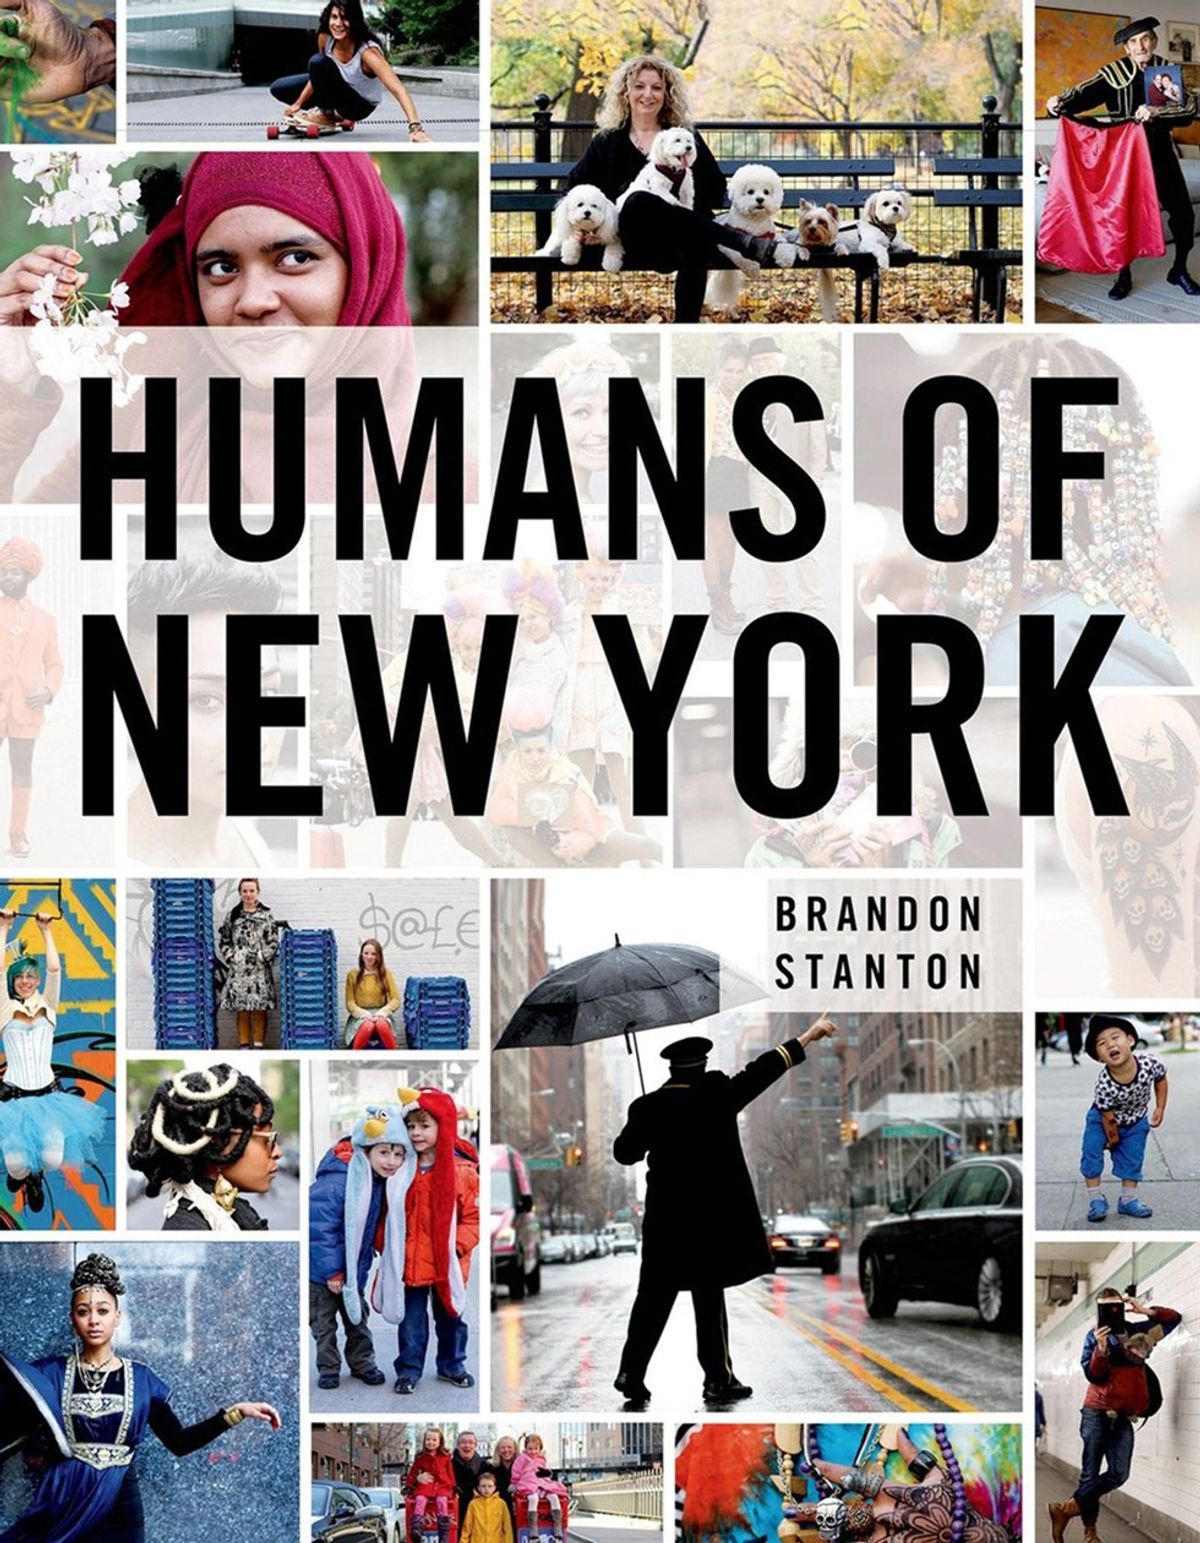 Why "Humans of New York" Is So Important